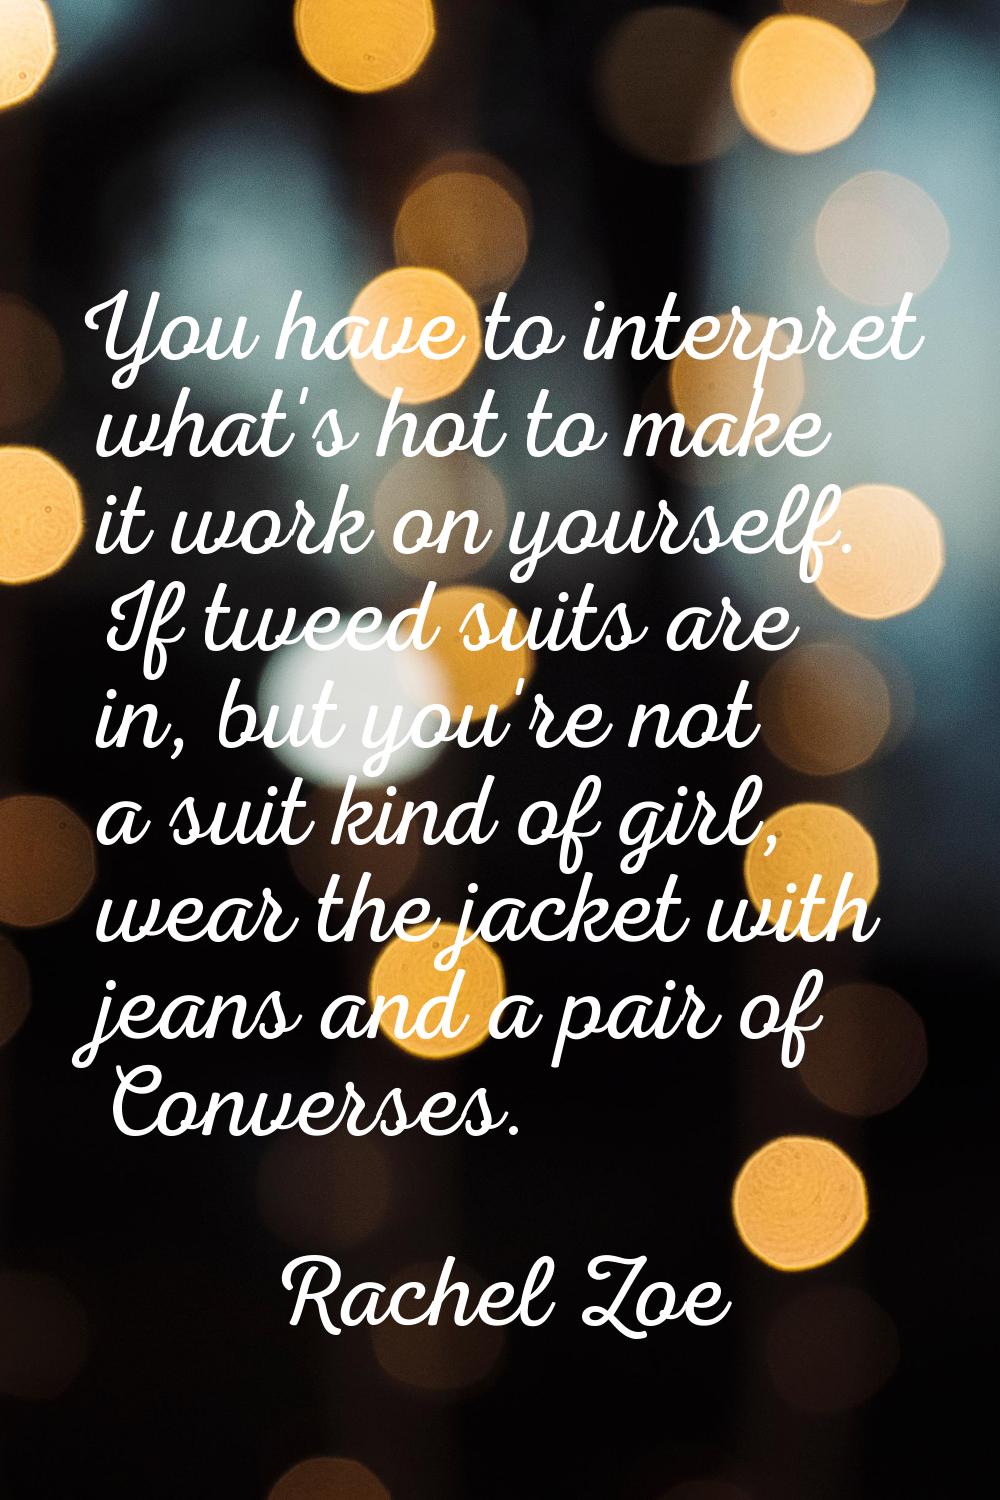 You have to interpret what's hot to make it work on yourself. If tweed suits are in, but you're not